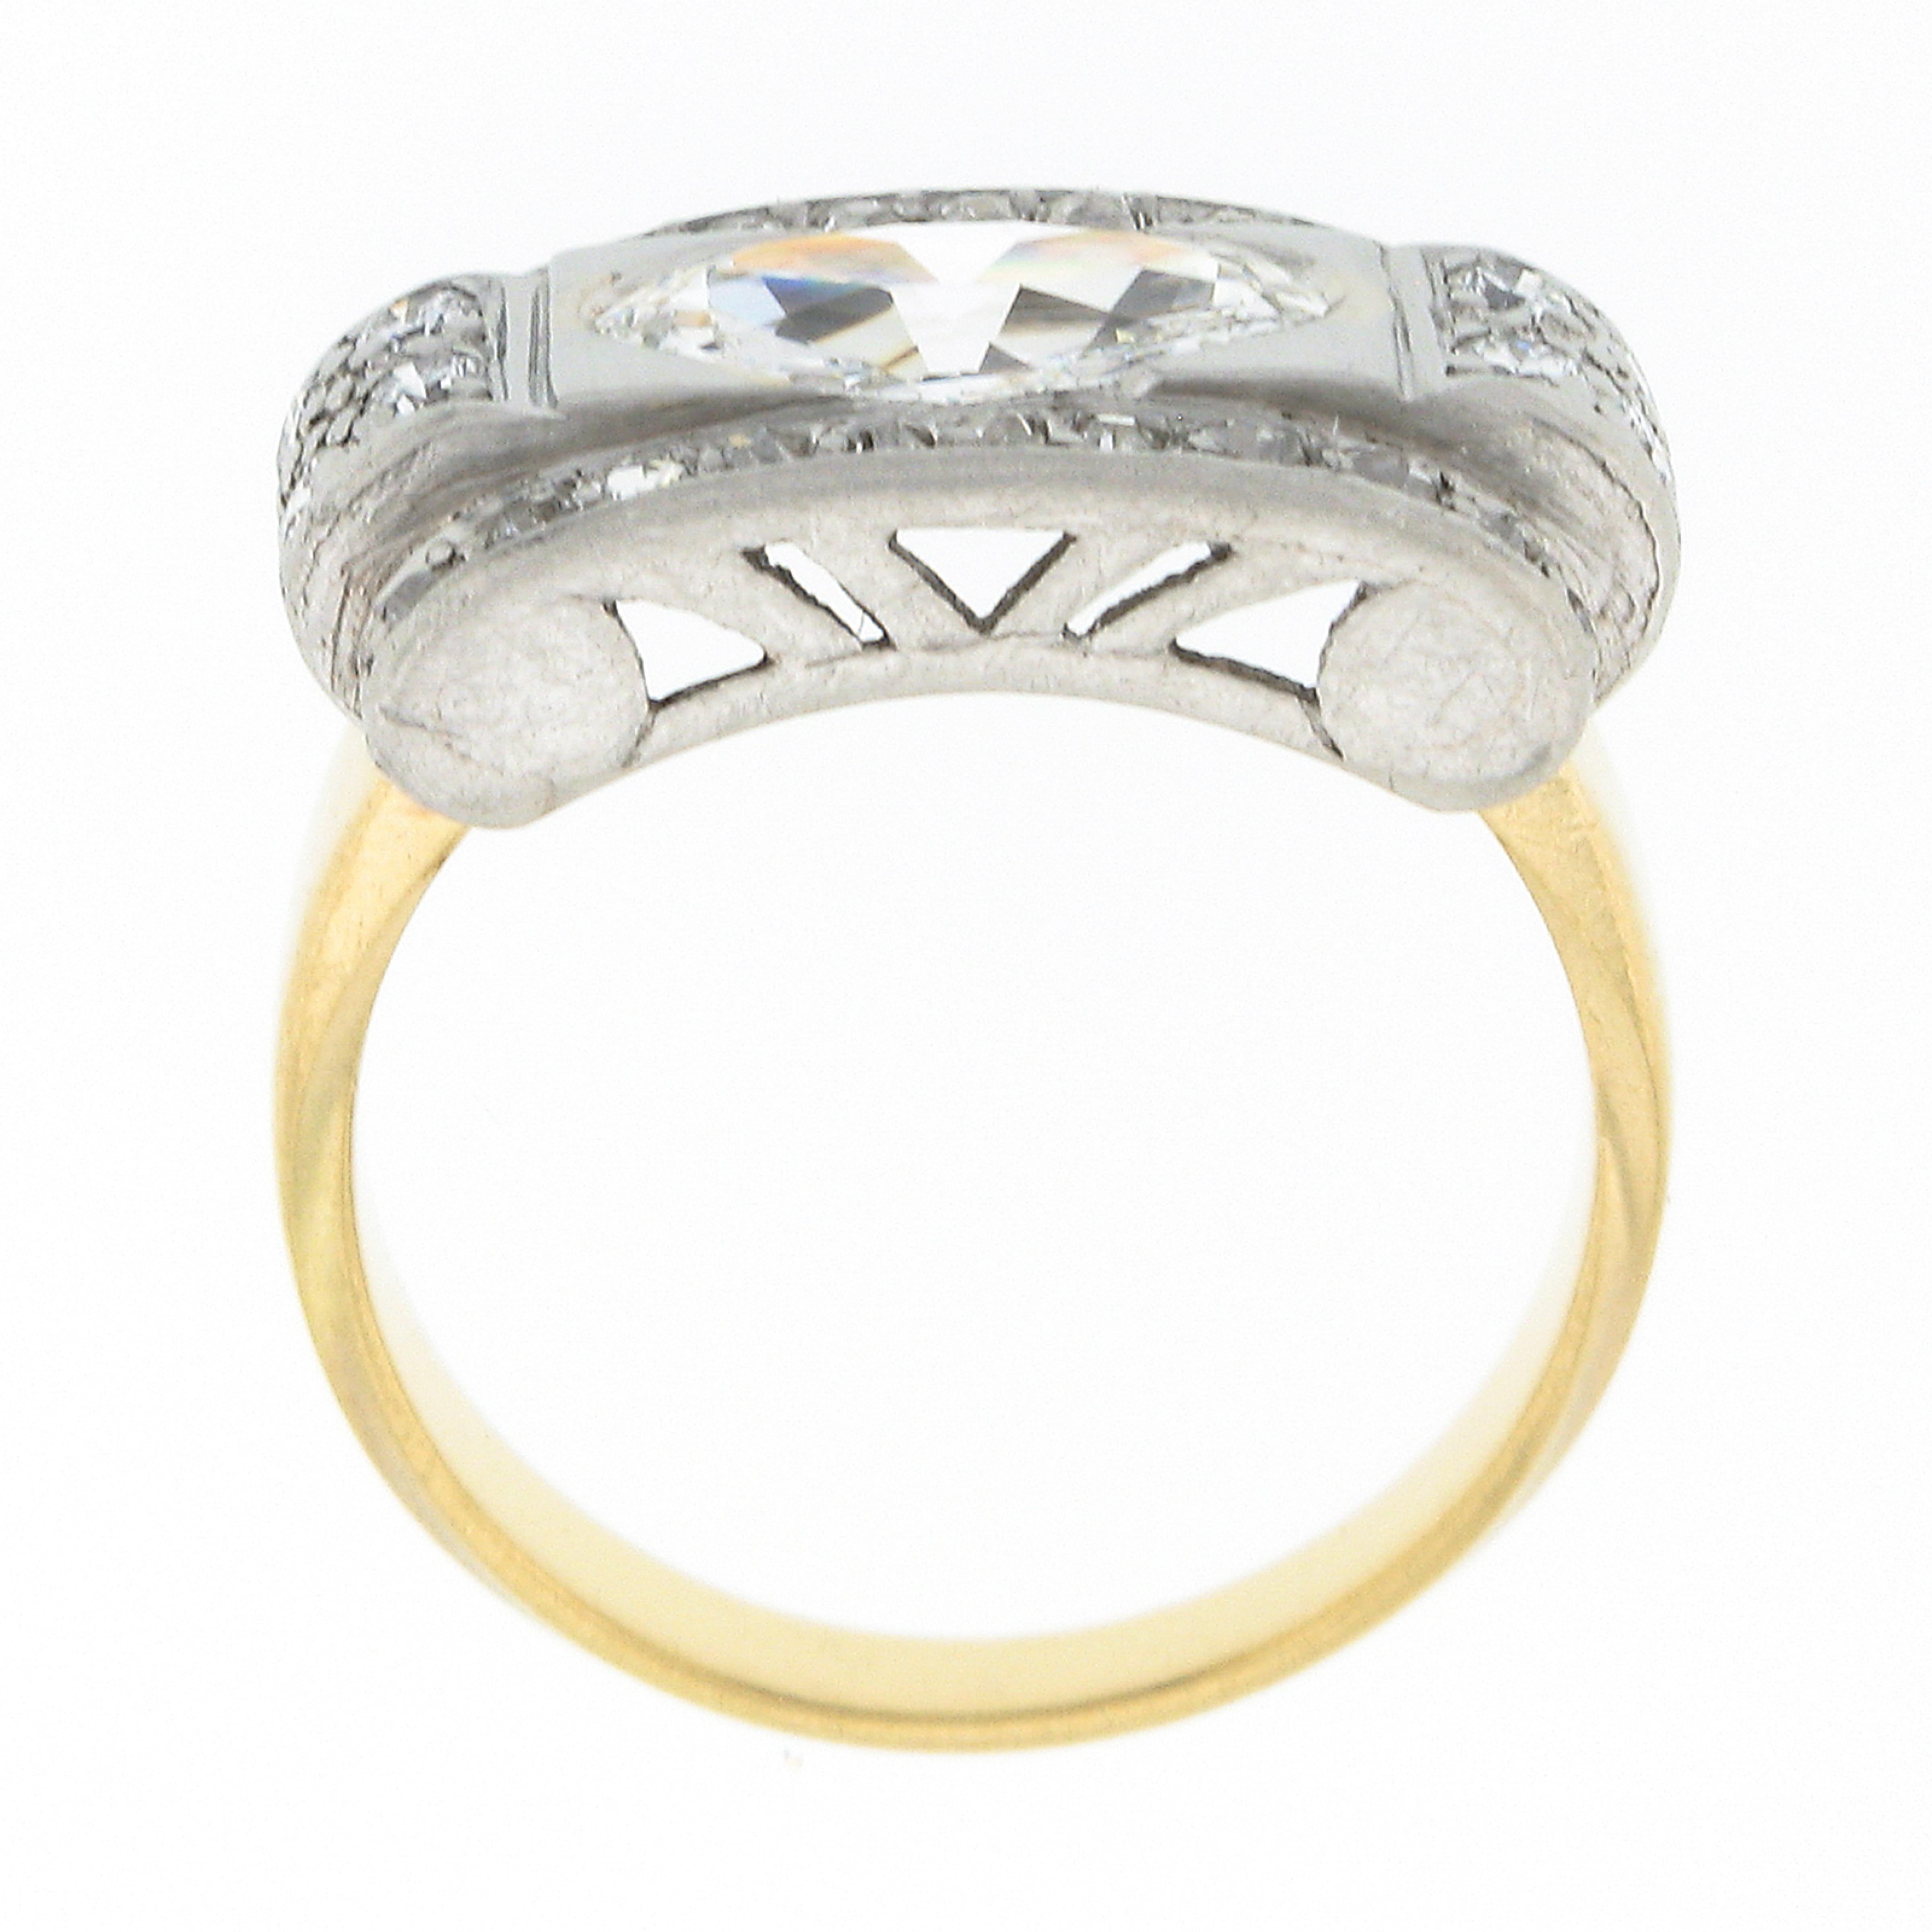 Antique Edwardian 18k Gold & Plat 1.40ct GIA Oval Diamond & Accents Platter Ring For Sale 2